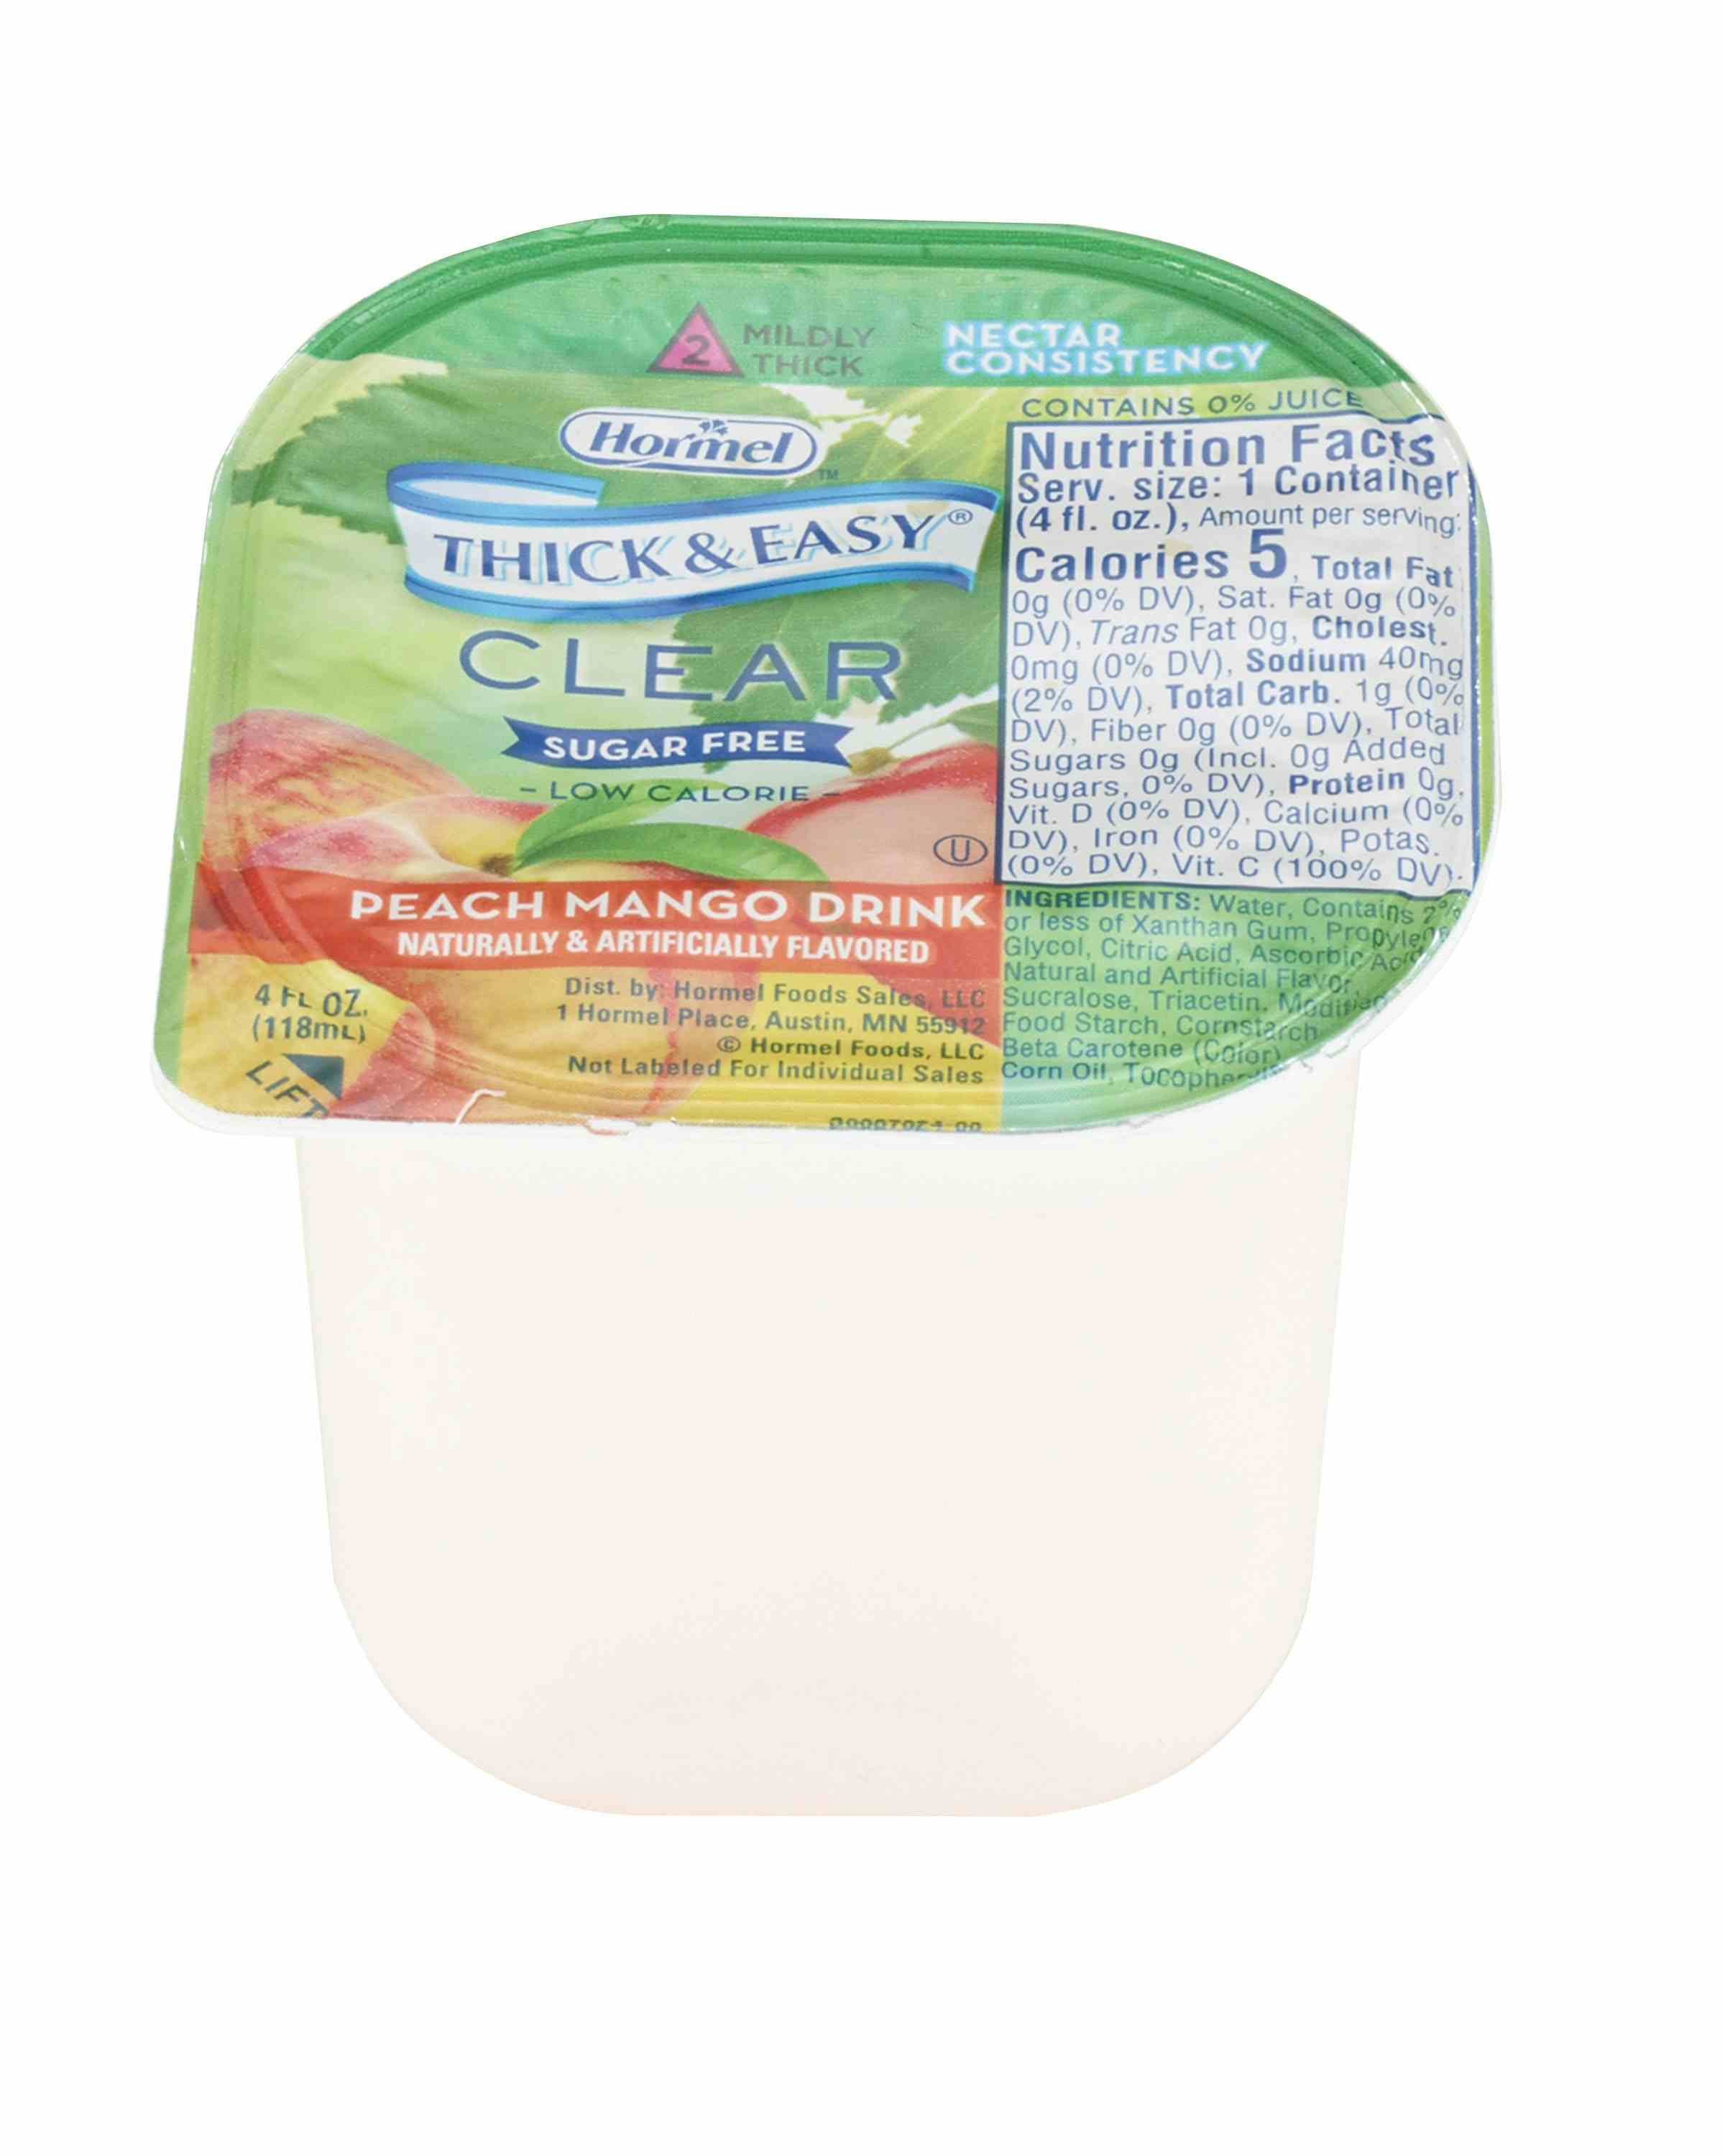 Hormel Thick & Easy Clear Sugar Free Low Calorie Thickened Beverage, Nectar Consistency, Mildly Thick, Peach Mango , 78768, Case of 24